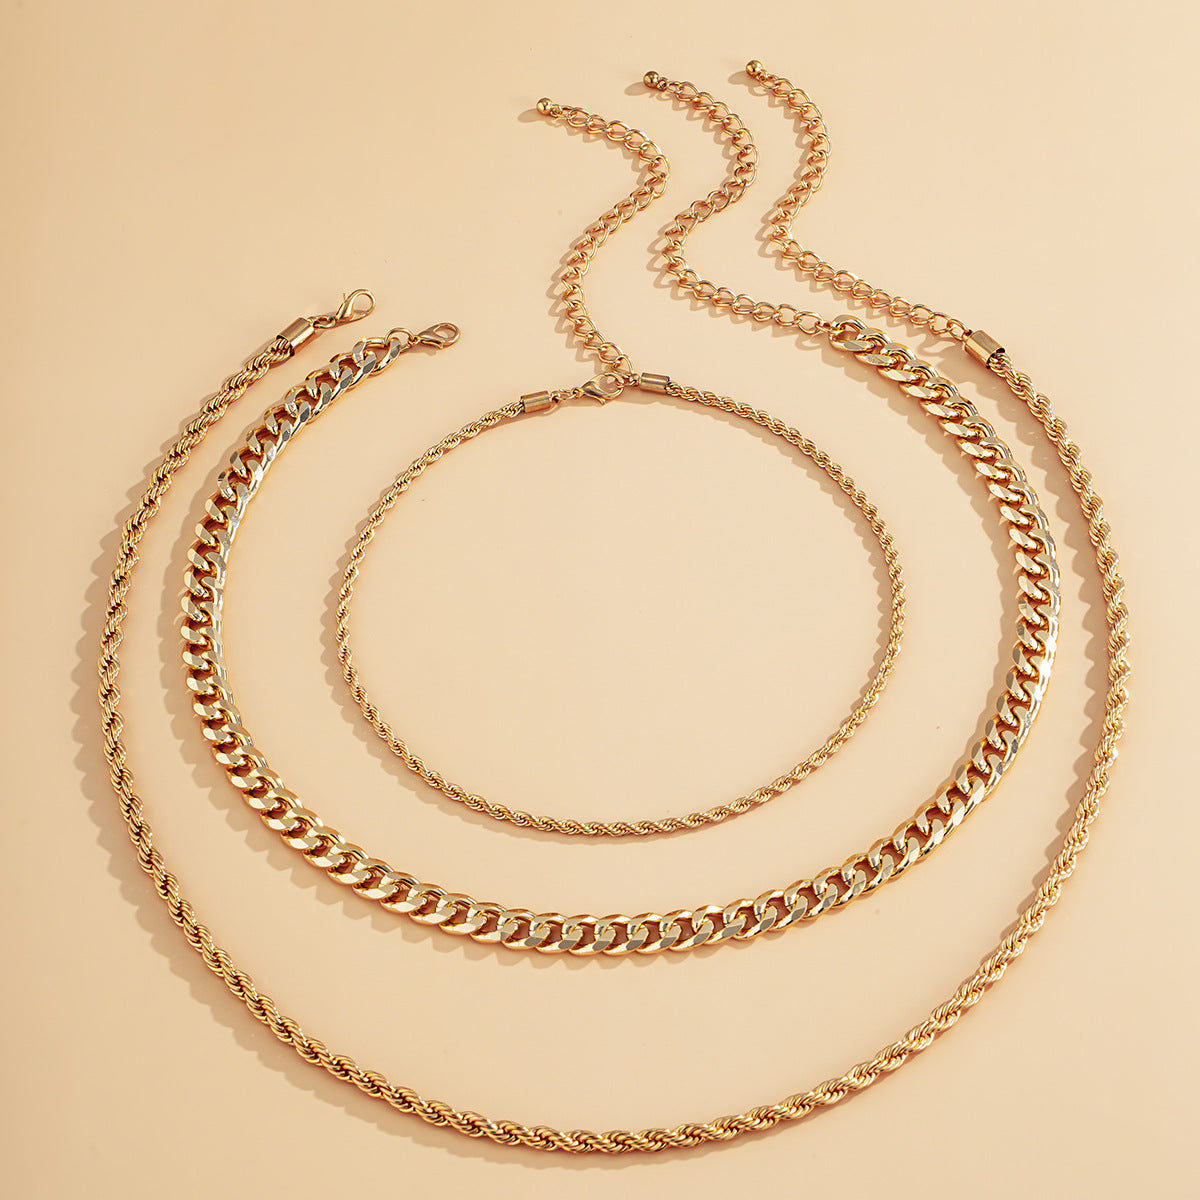 Complete Your Look with 3 Layered Silver Twist Rope Chain Necklaces with Rhinestones